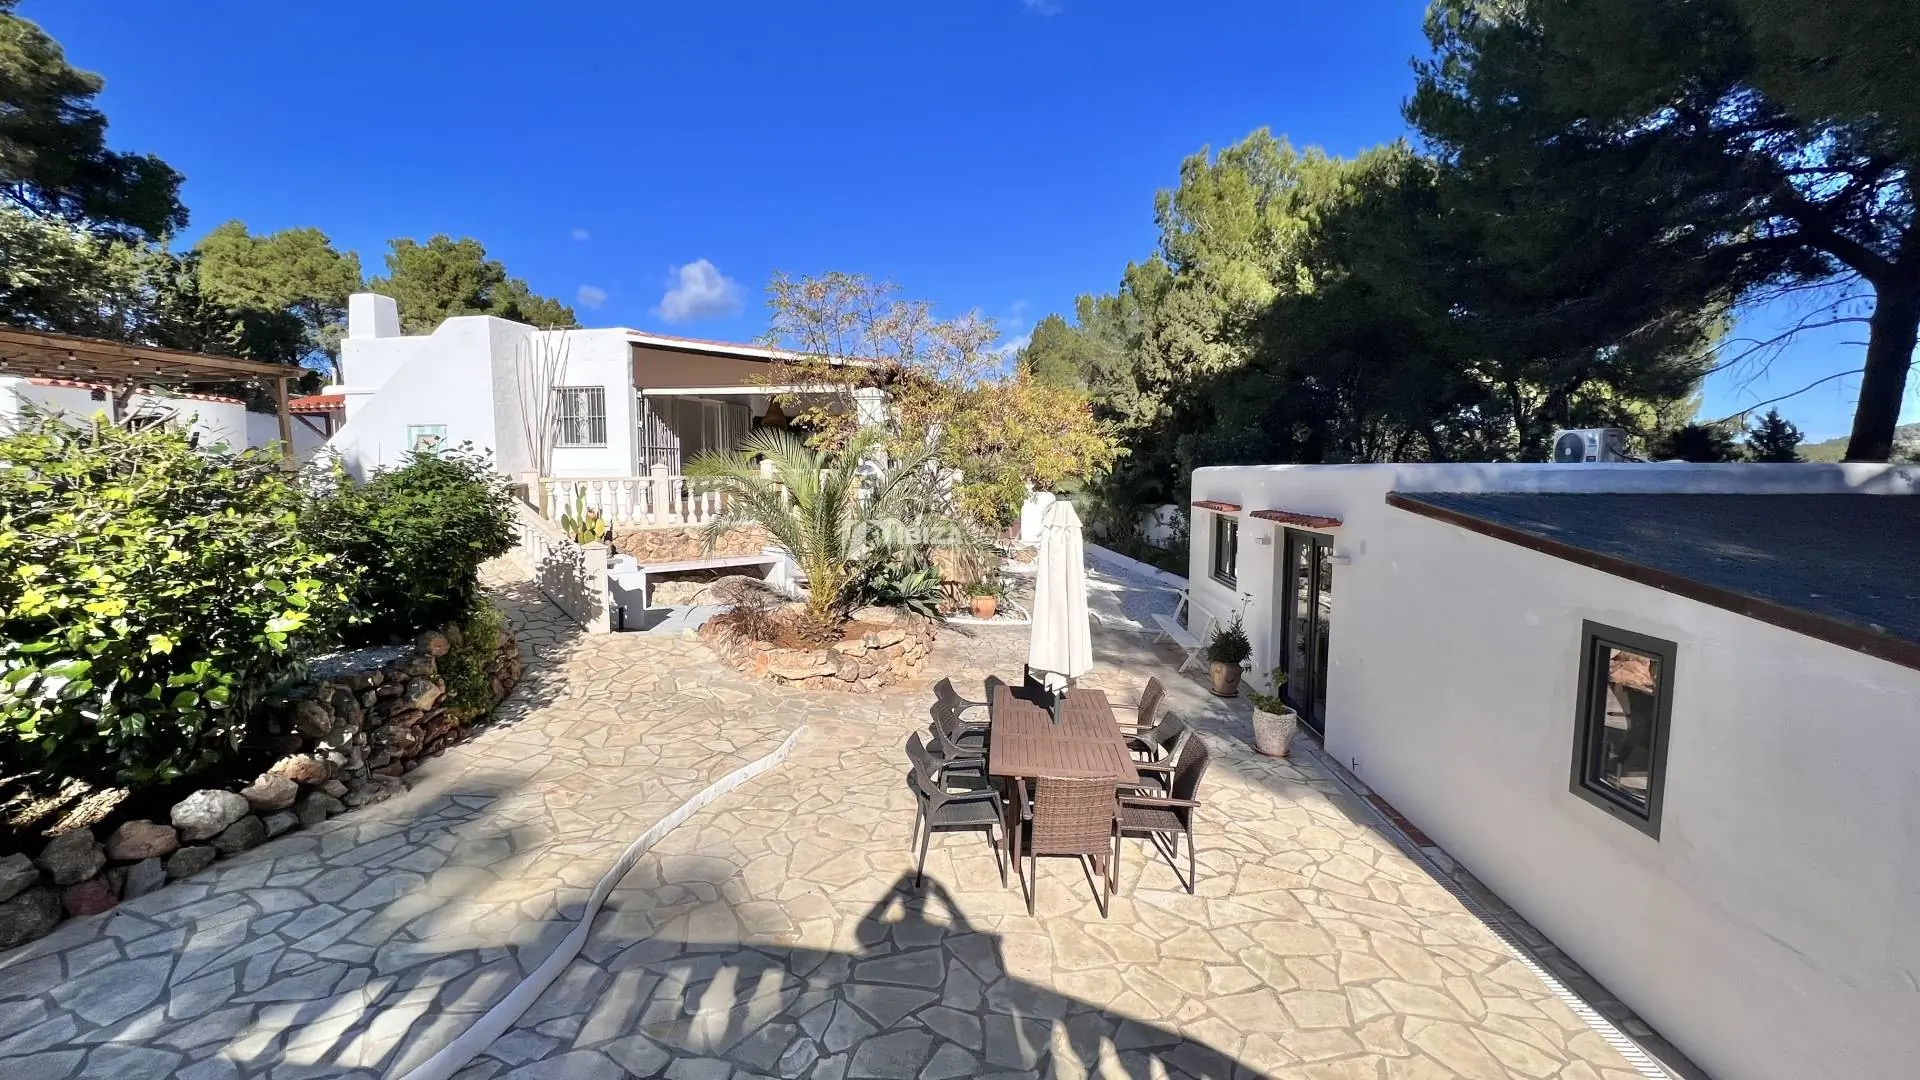 Fantastic 5-bedroom en-suite country villa with guest house within walking distance of the beach to buy.